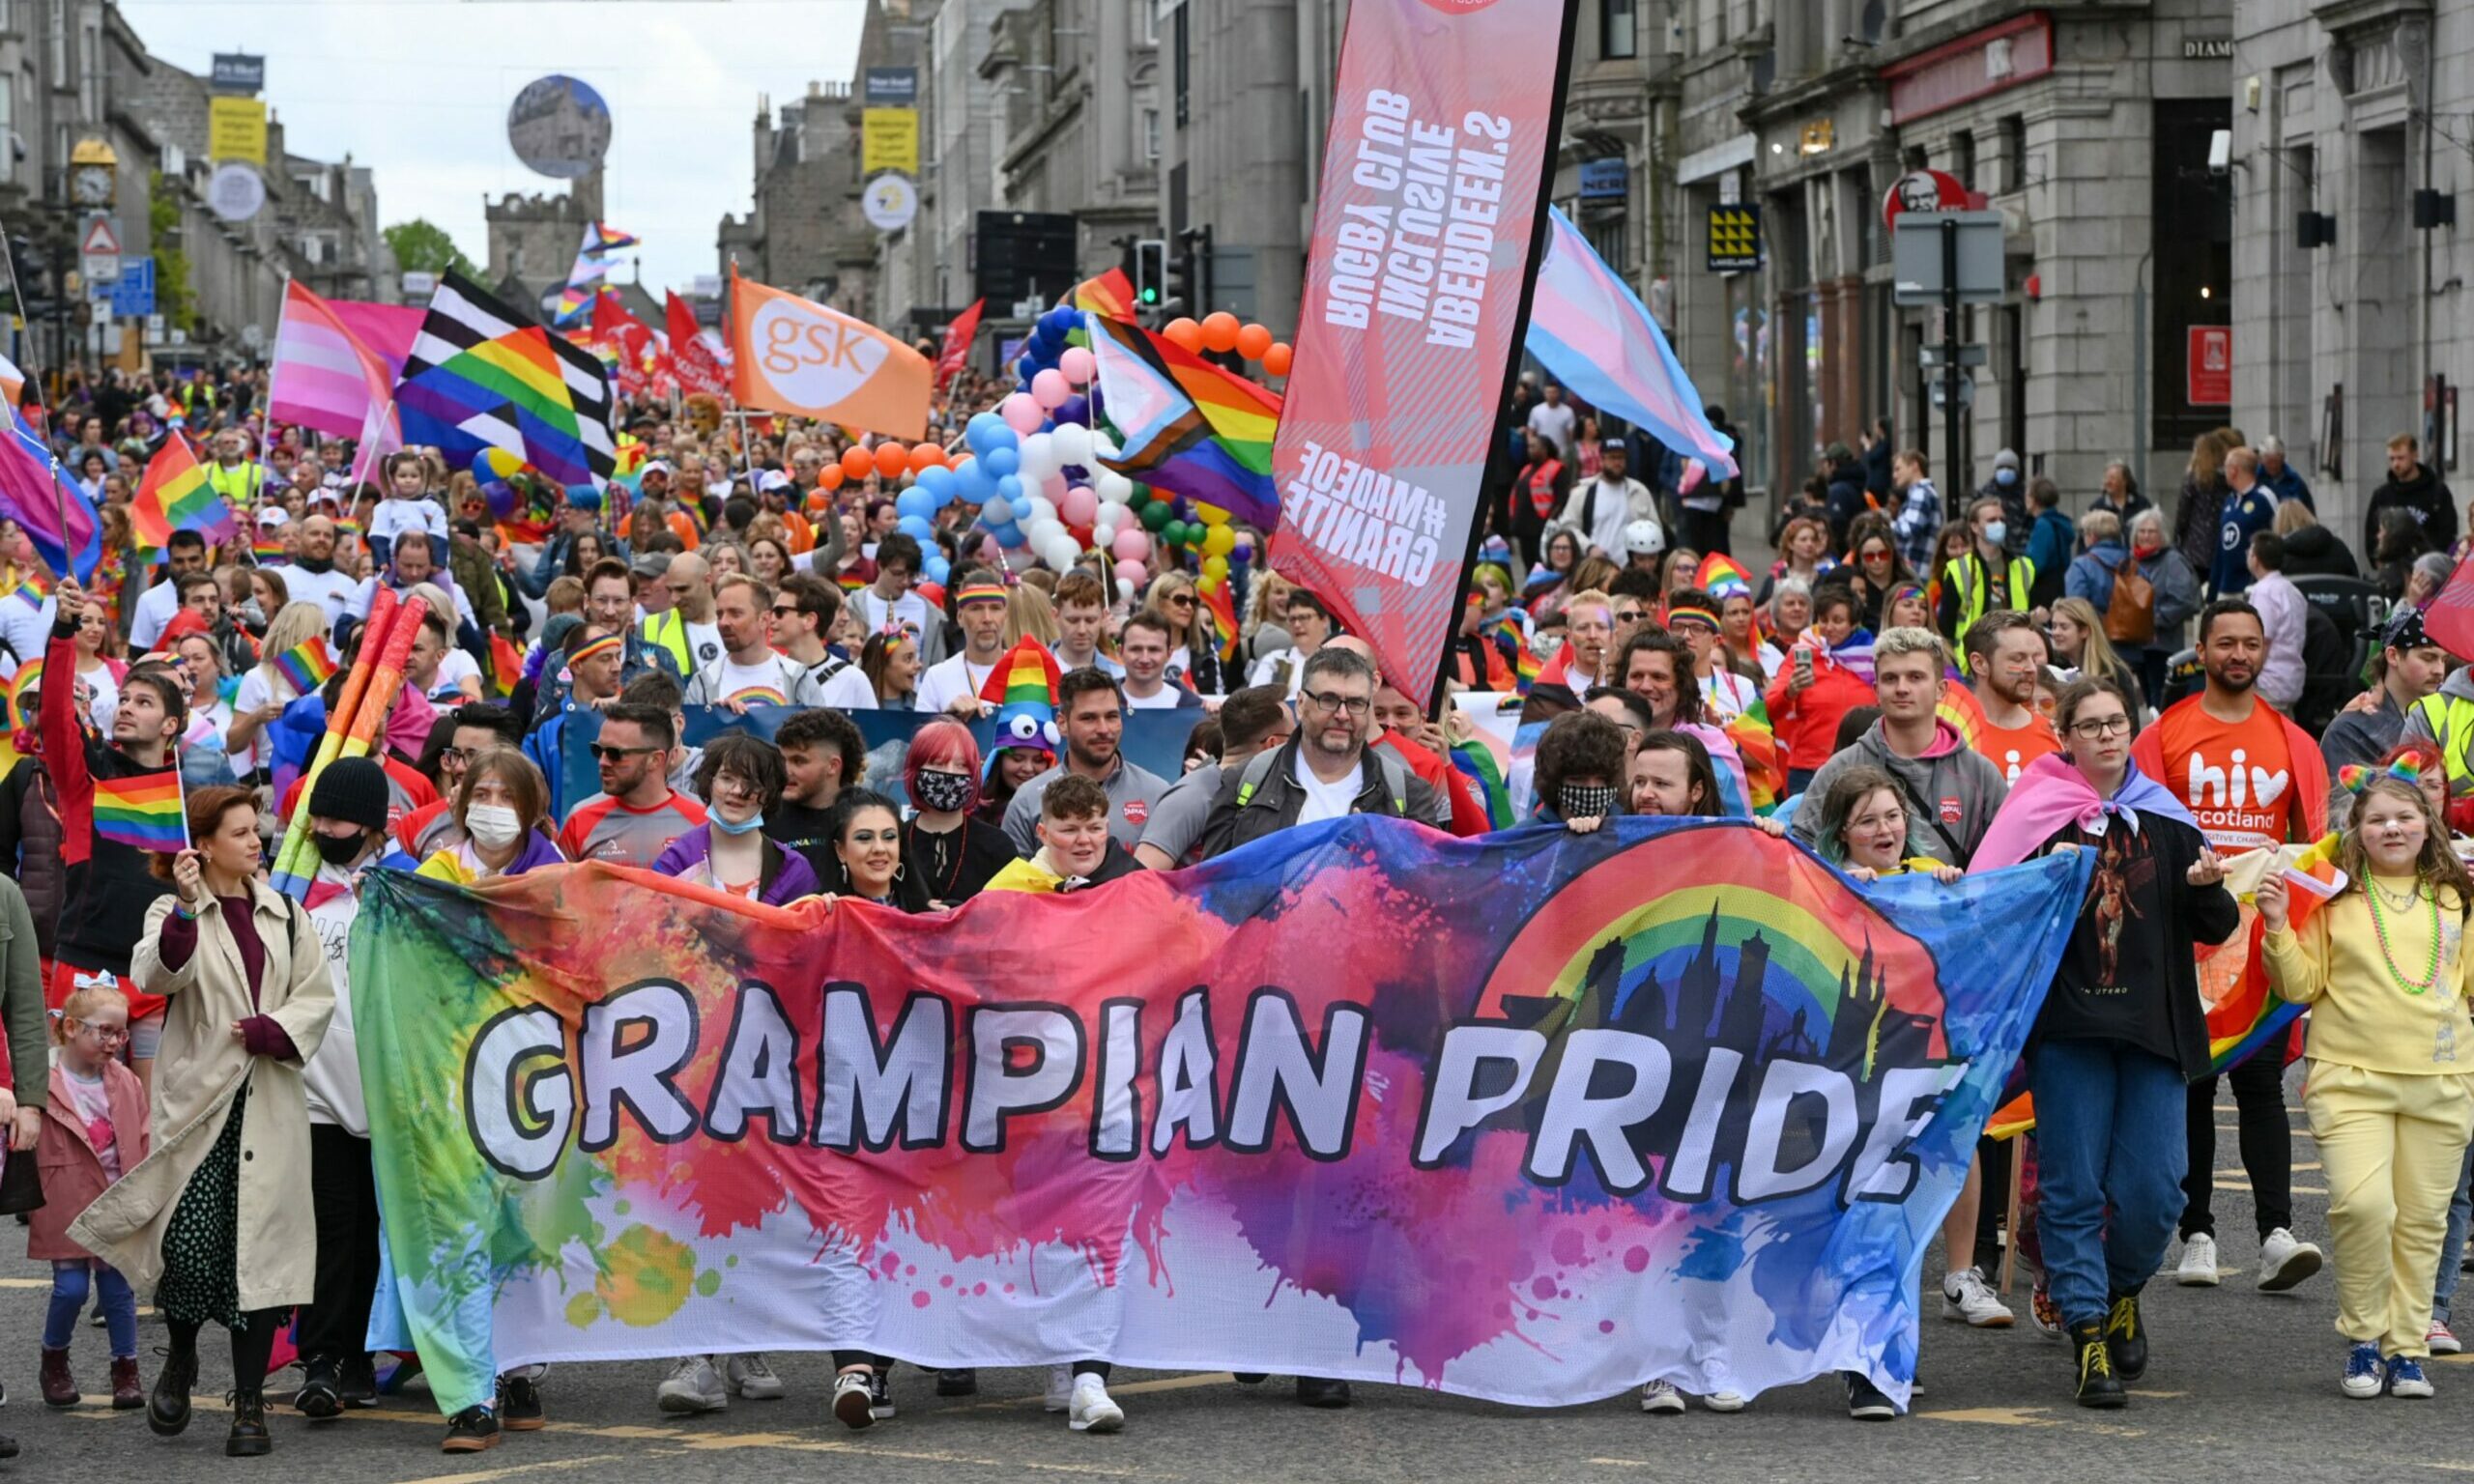 Thousands take to Aberdeen streets for Grampian Pride 2022